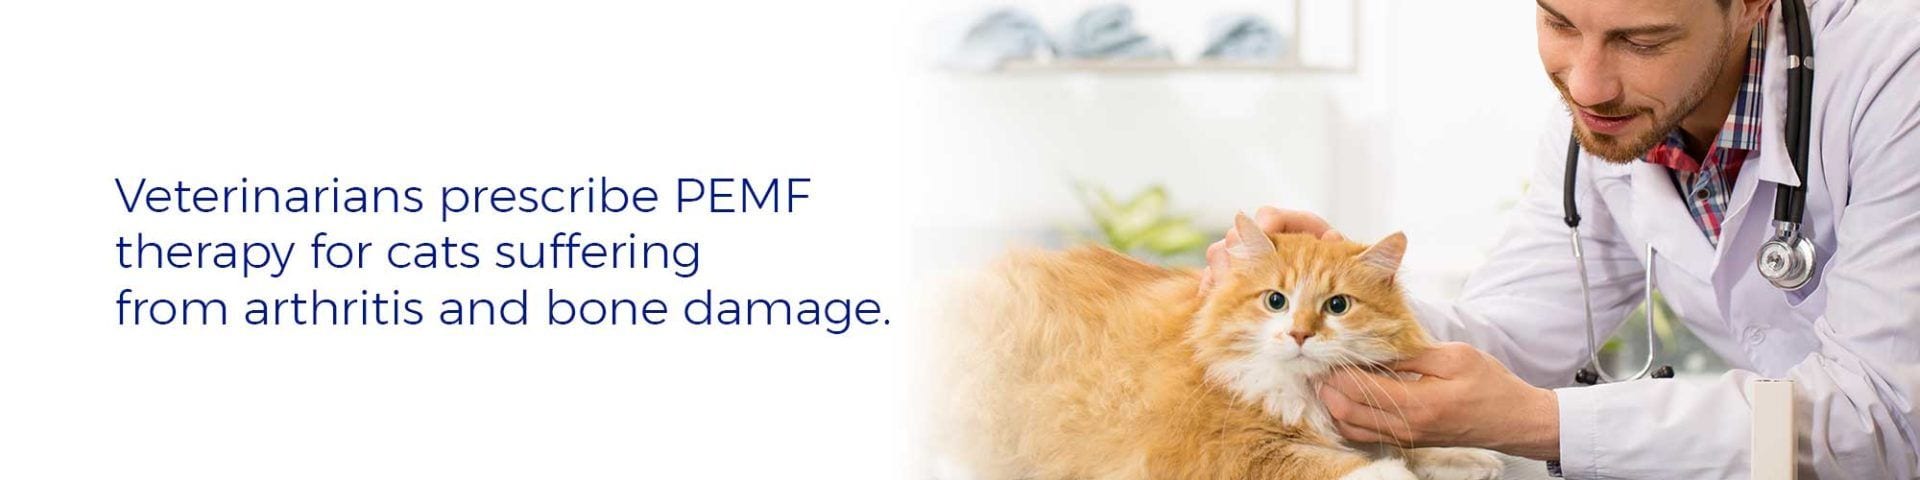 PEMF-Therapy for cats for arthritis and bone damage